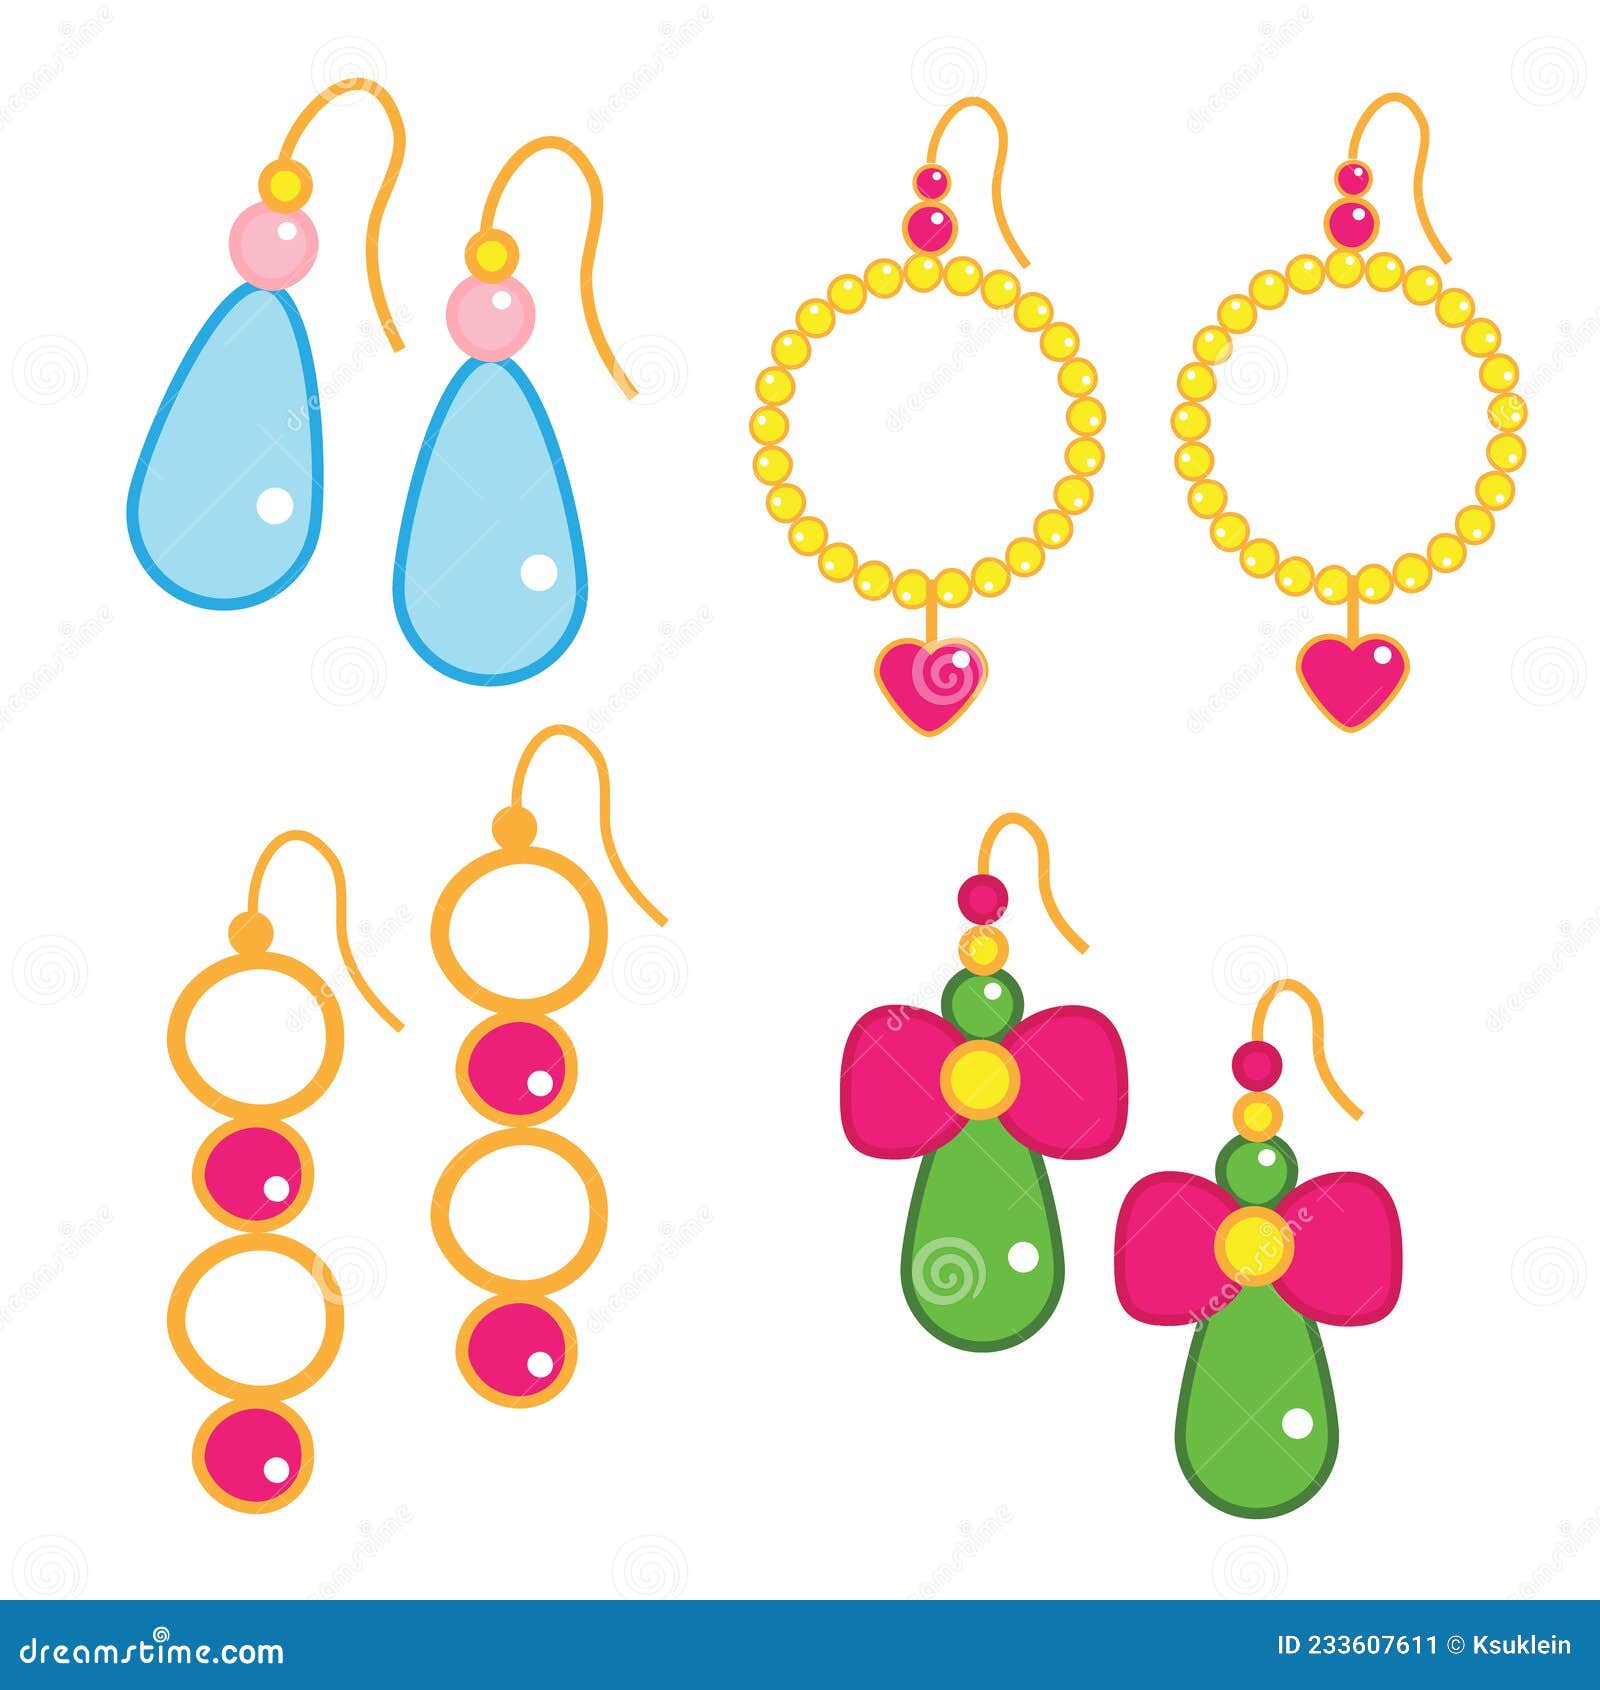 Set Of Cartoon Earrings Accessories For Children And Kids Princess